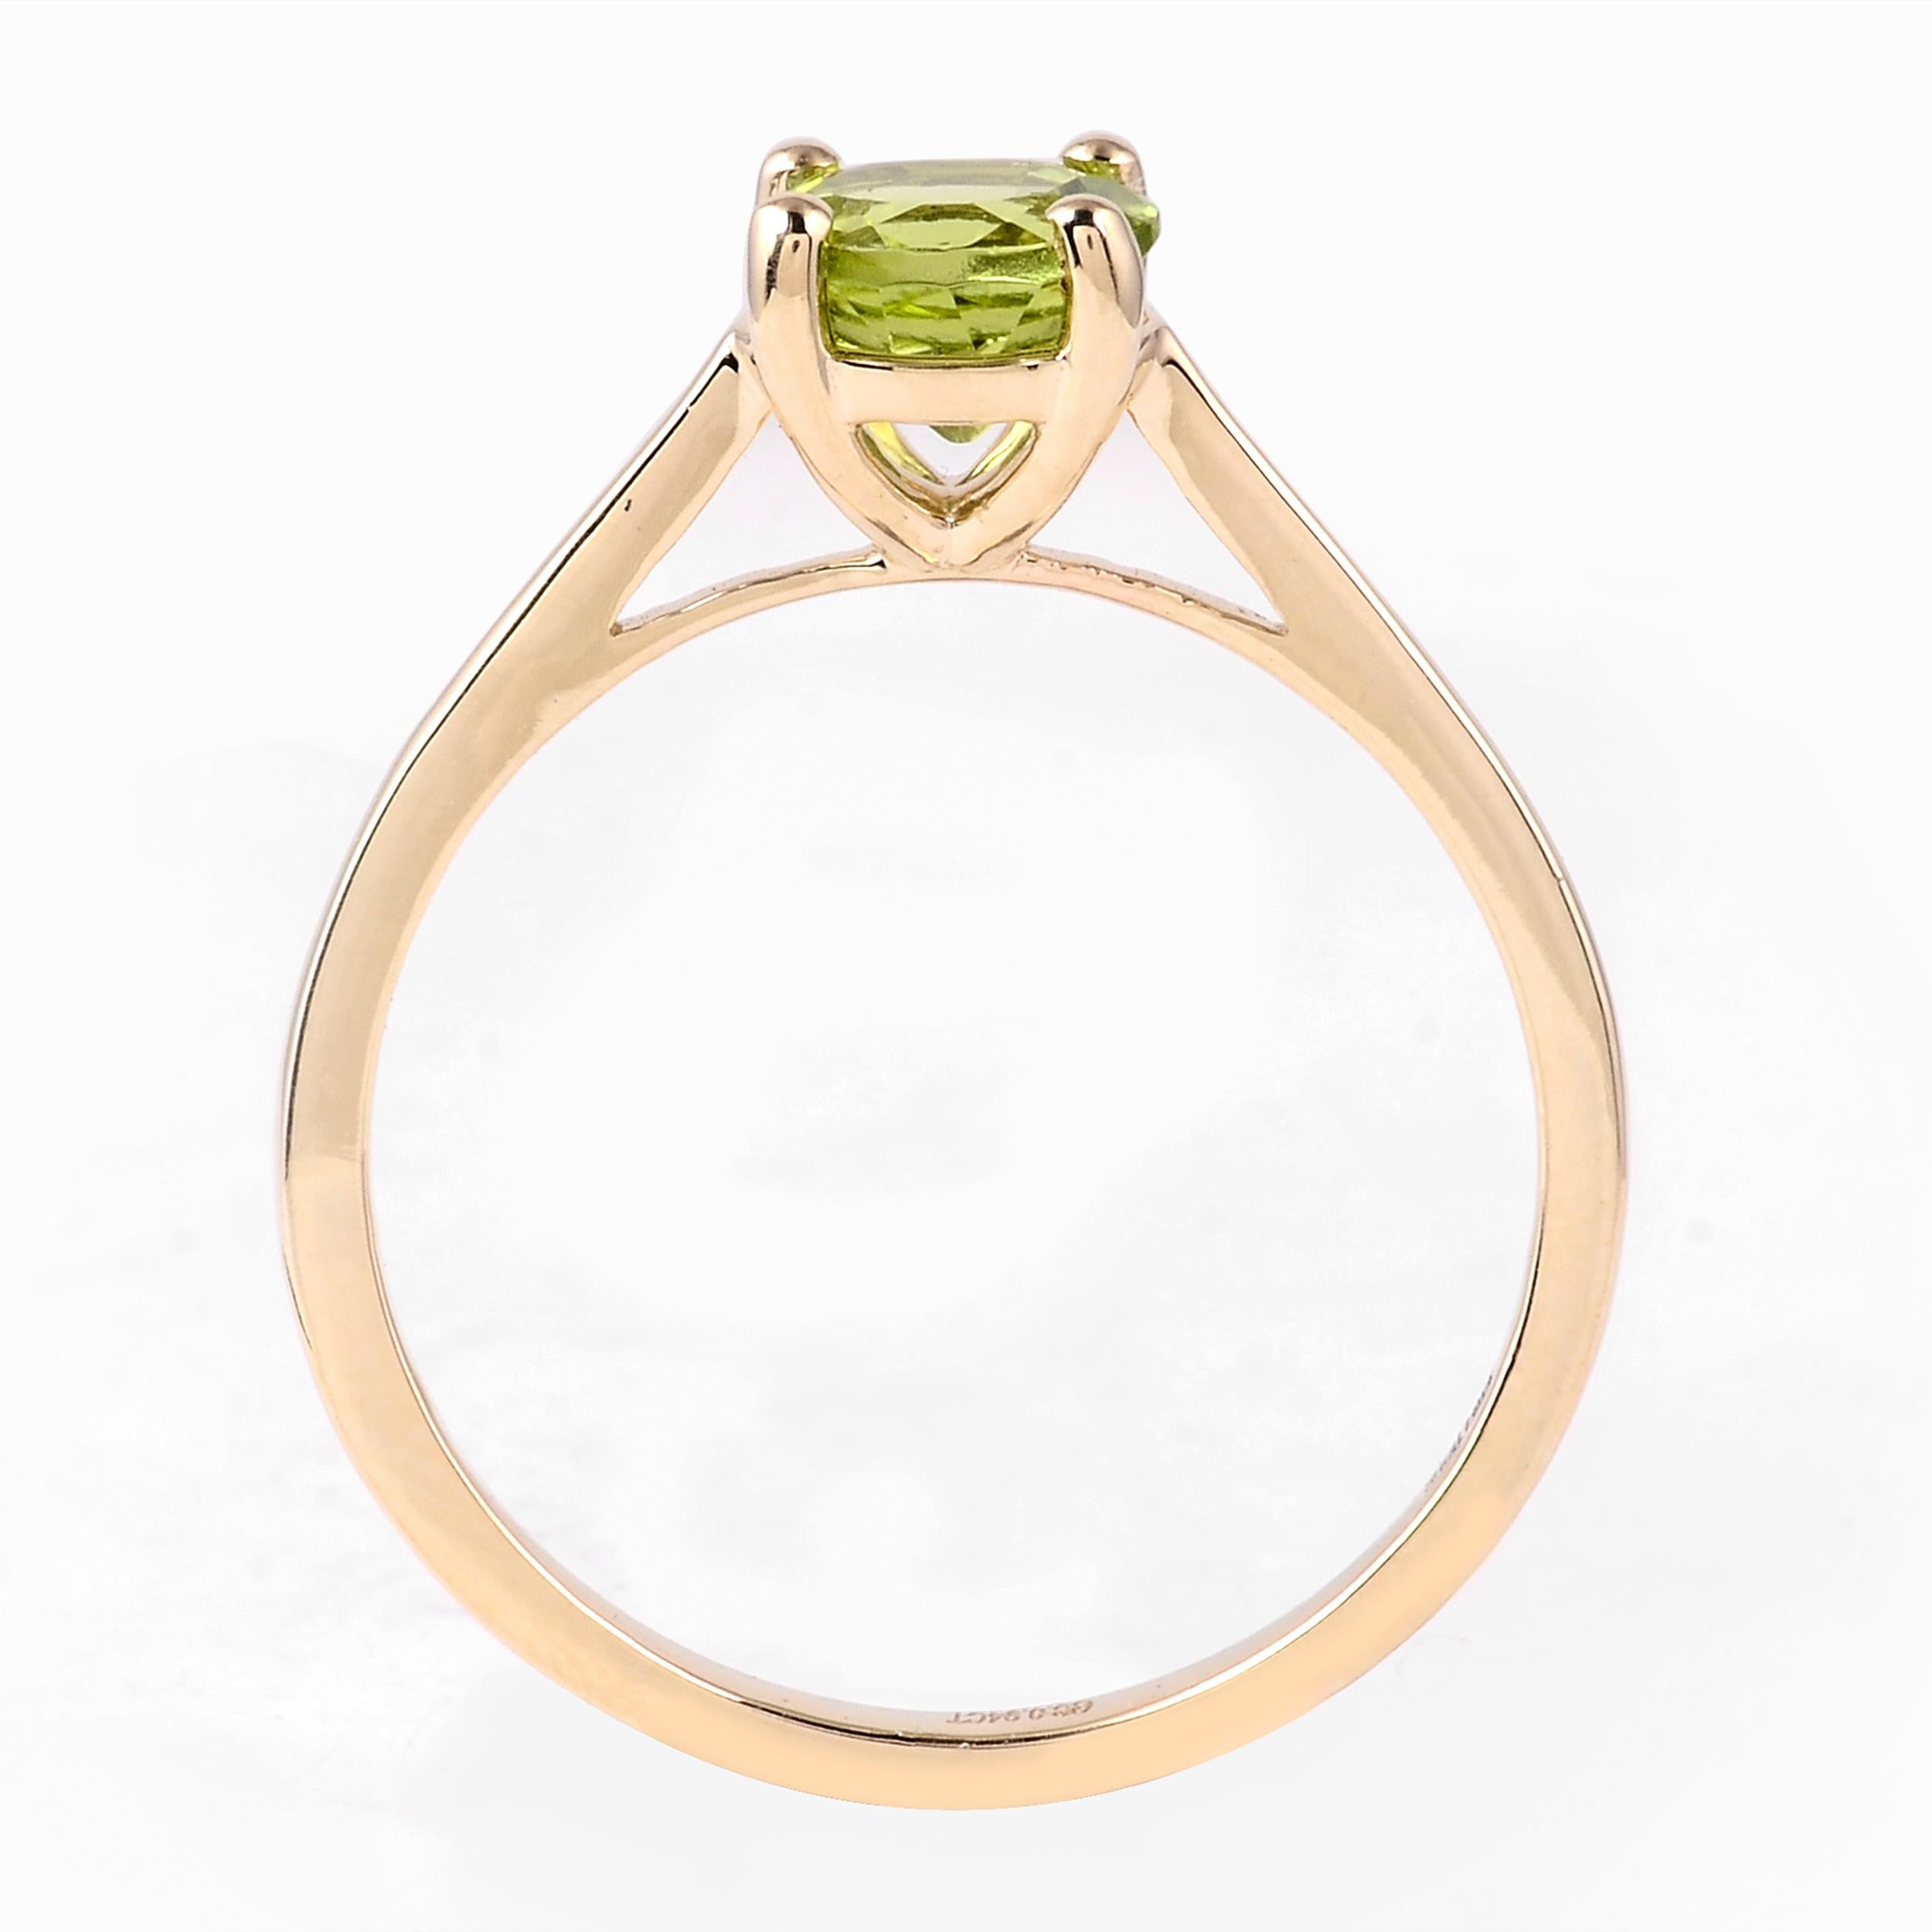 Elevate your jewelry collection with the enchanting allure of the Harmony in Green Peridot Ring. As a brand deeply rooted in celebrating the wonders of nature, we present this exquisite ring as a harmonious ode to the tranquil qualities of the